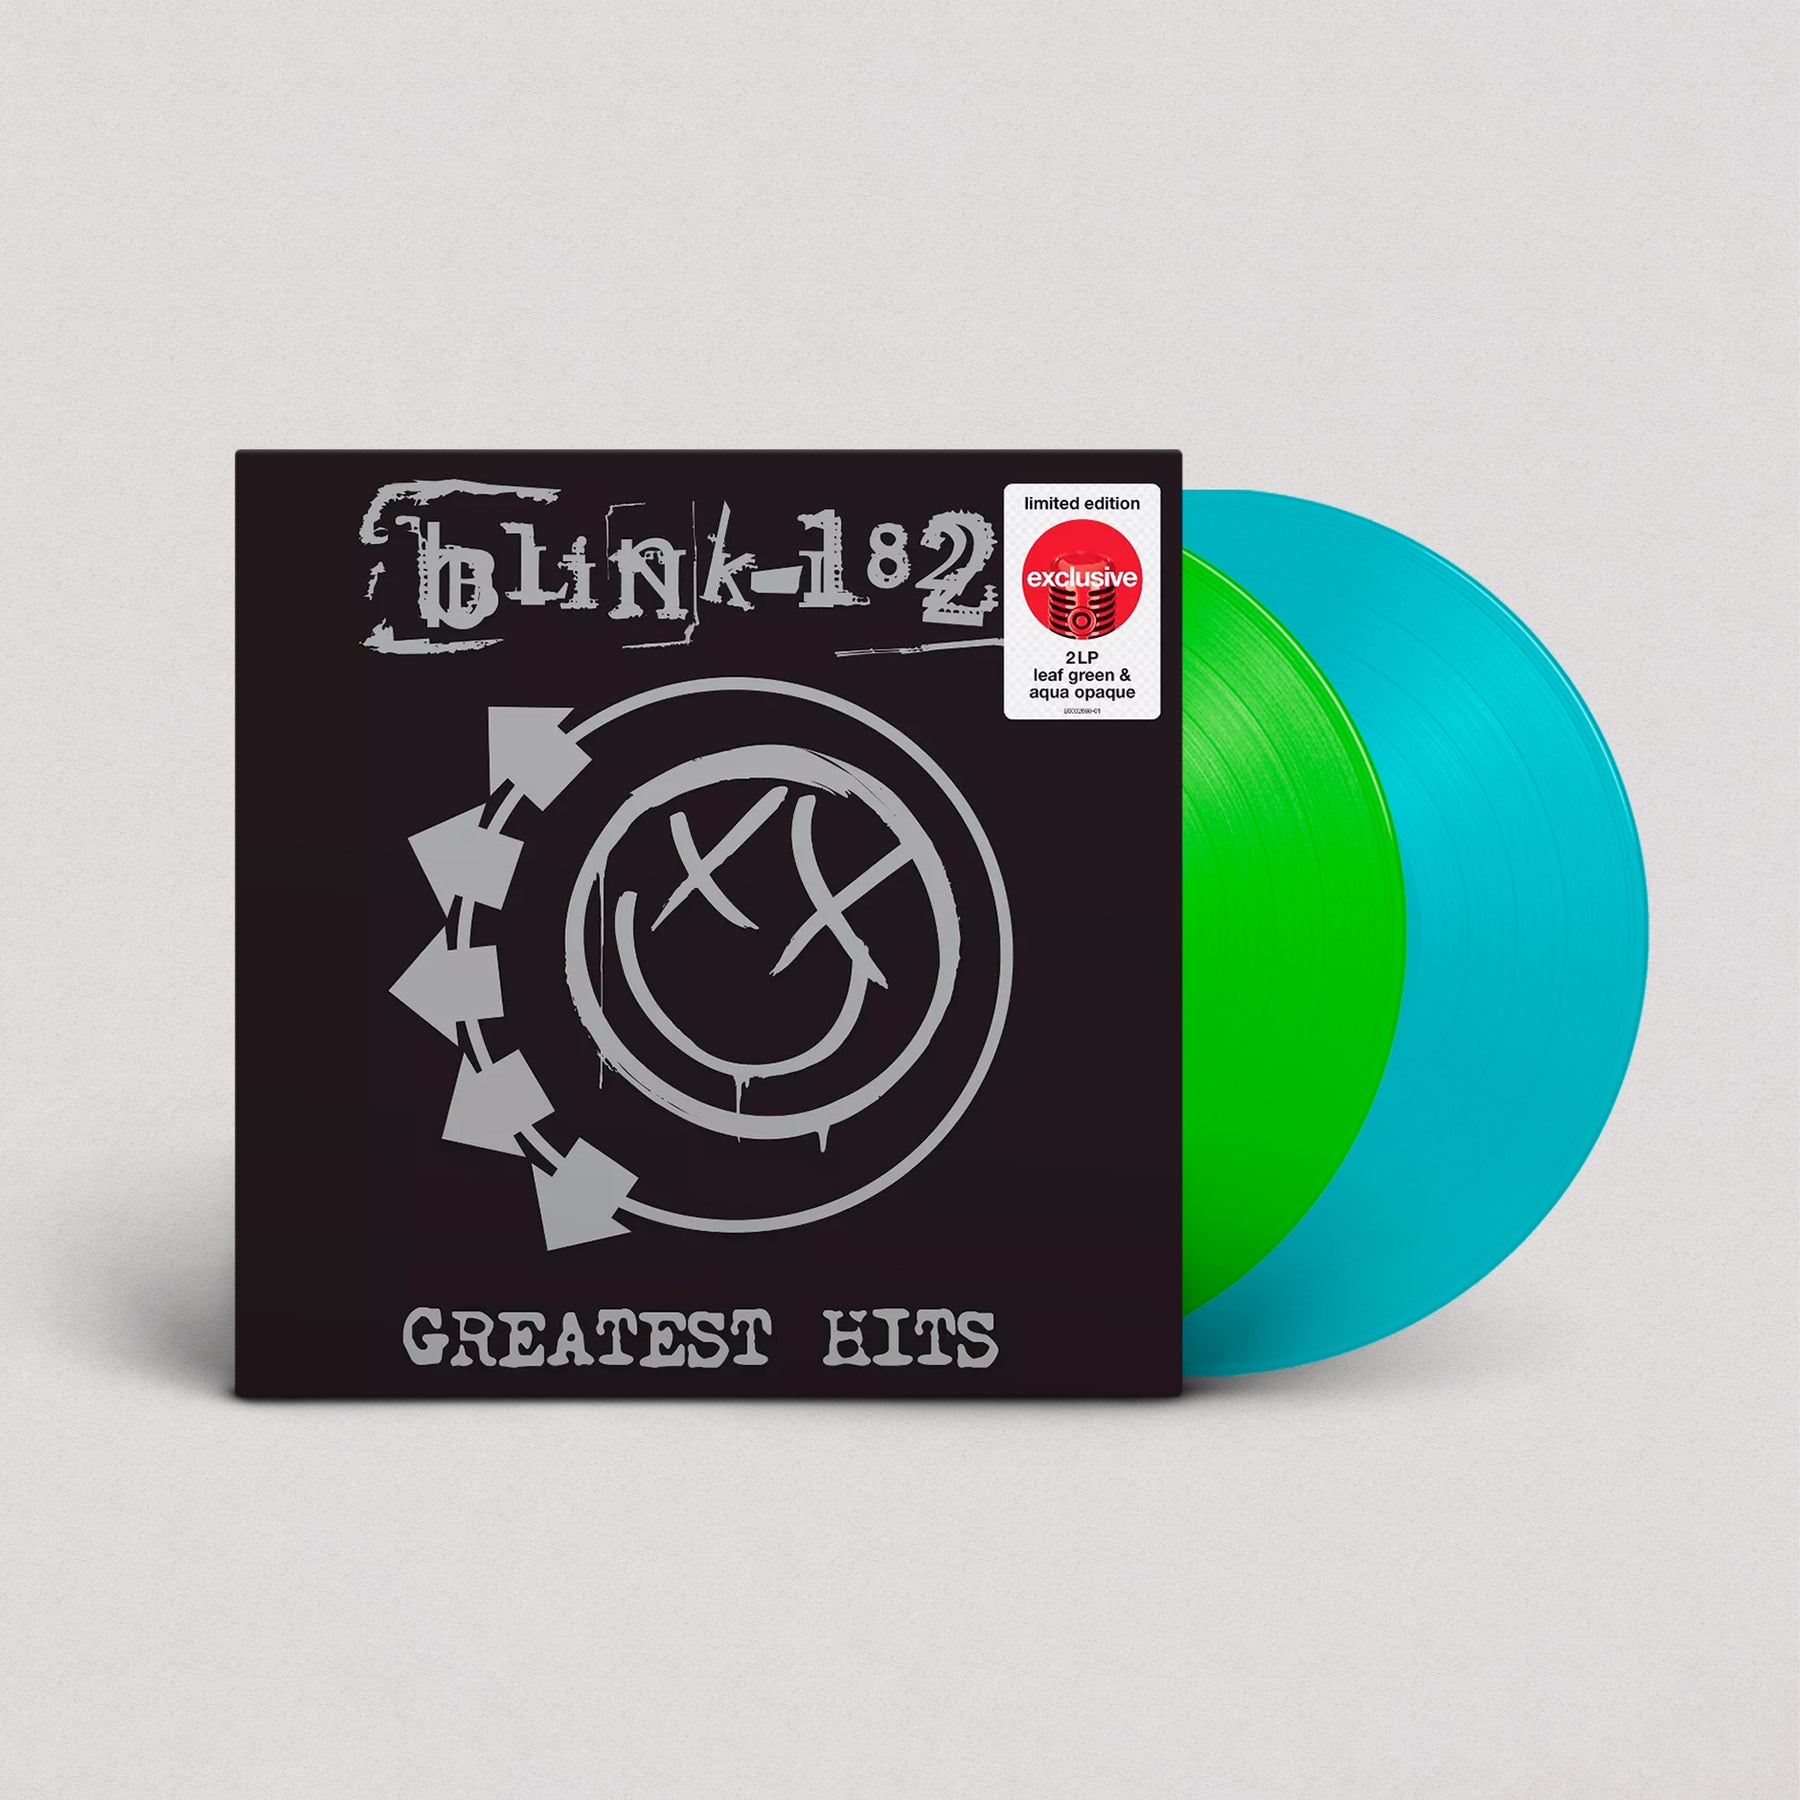 Blink-182 - Greatest Hits (Target Exclusive, Vinilo)